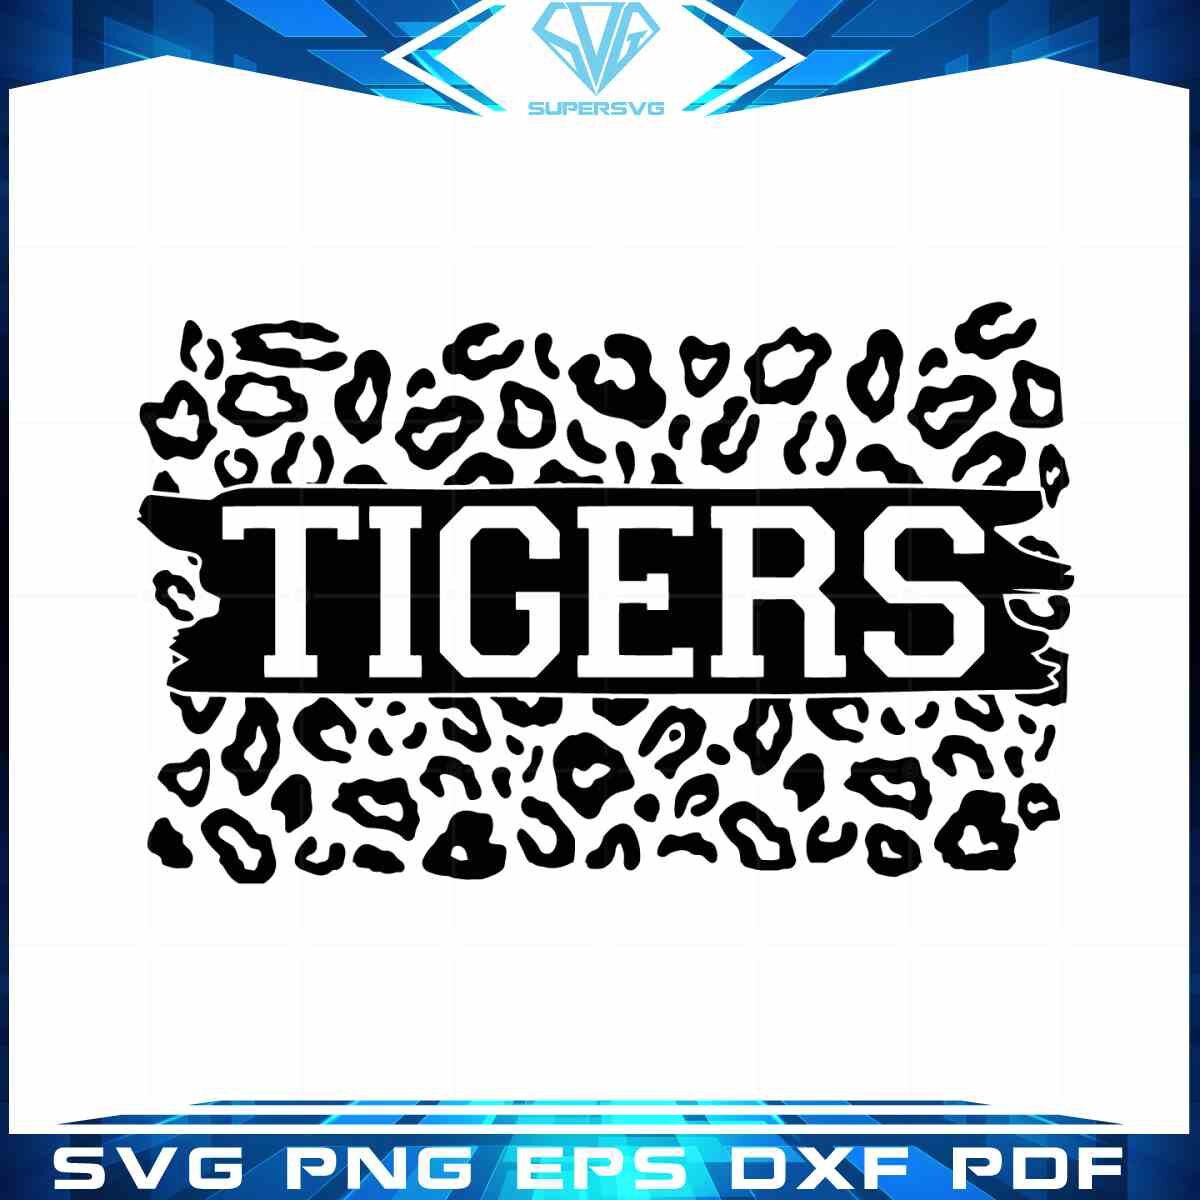 tigers-on-leopard-logo-for-sport-lovers-svg-sublimation-files-silhouette